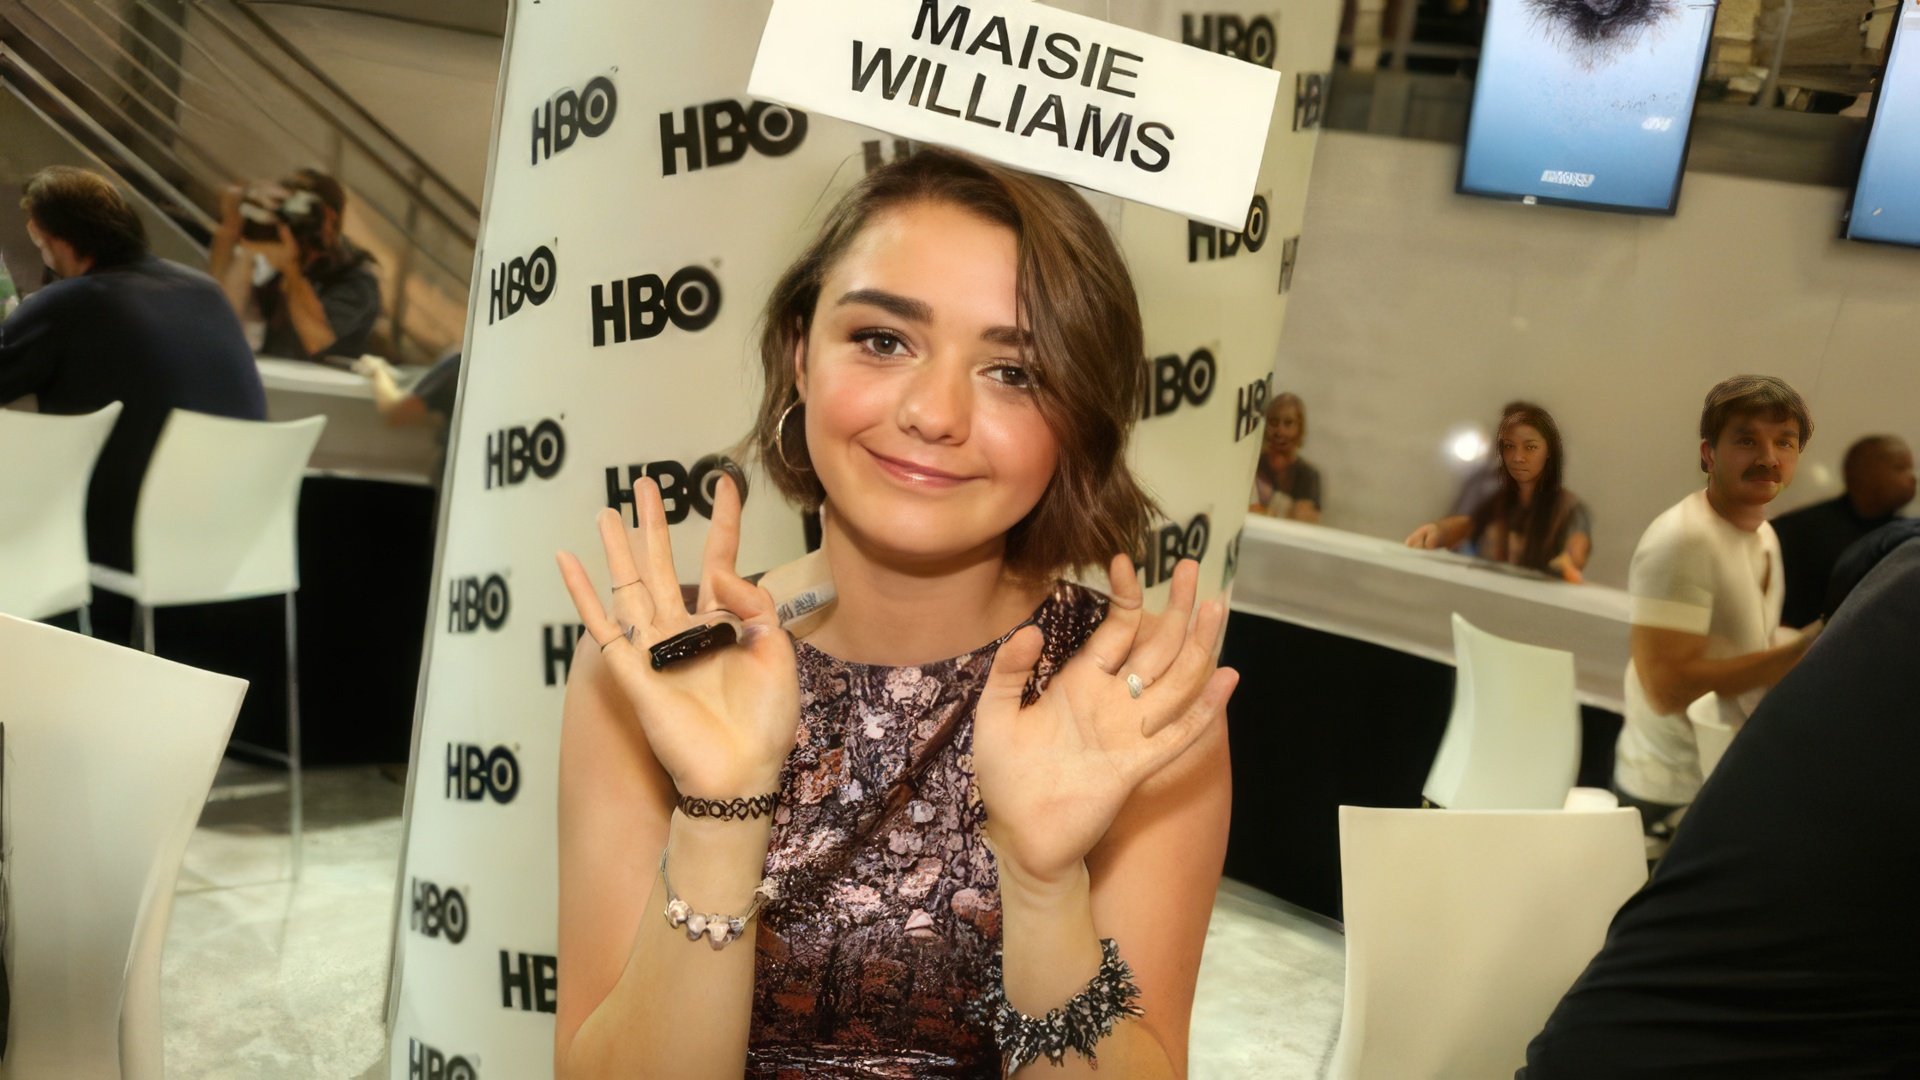 Maisie Williams was approved for the role of Arya Stark very quickly